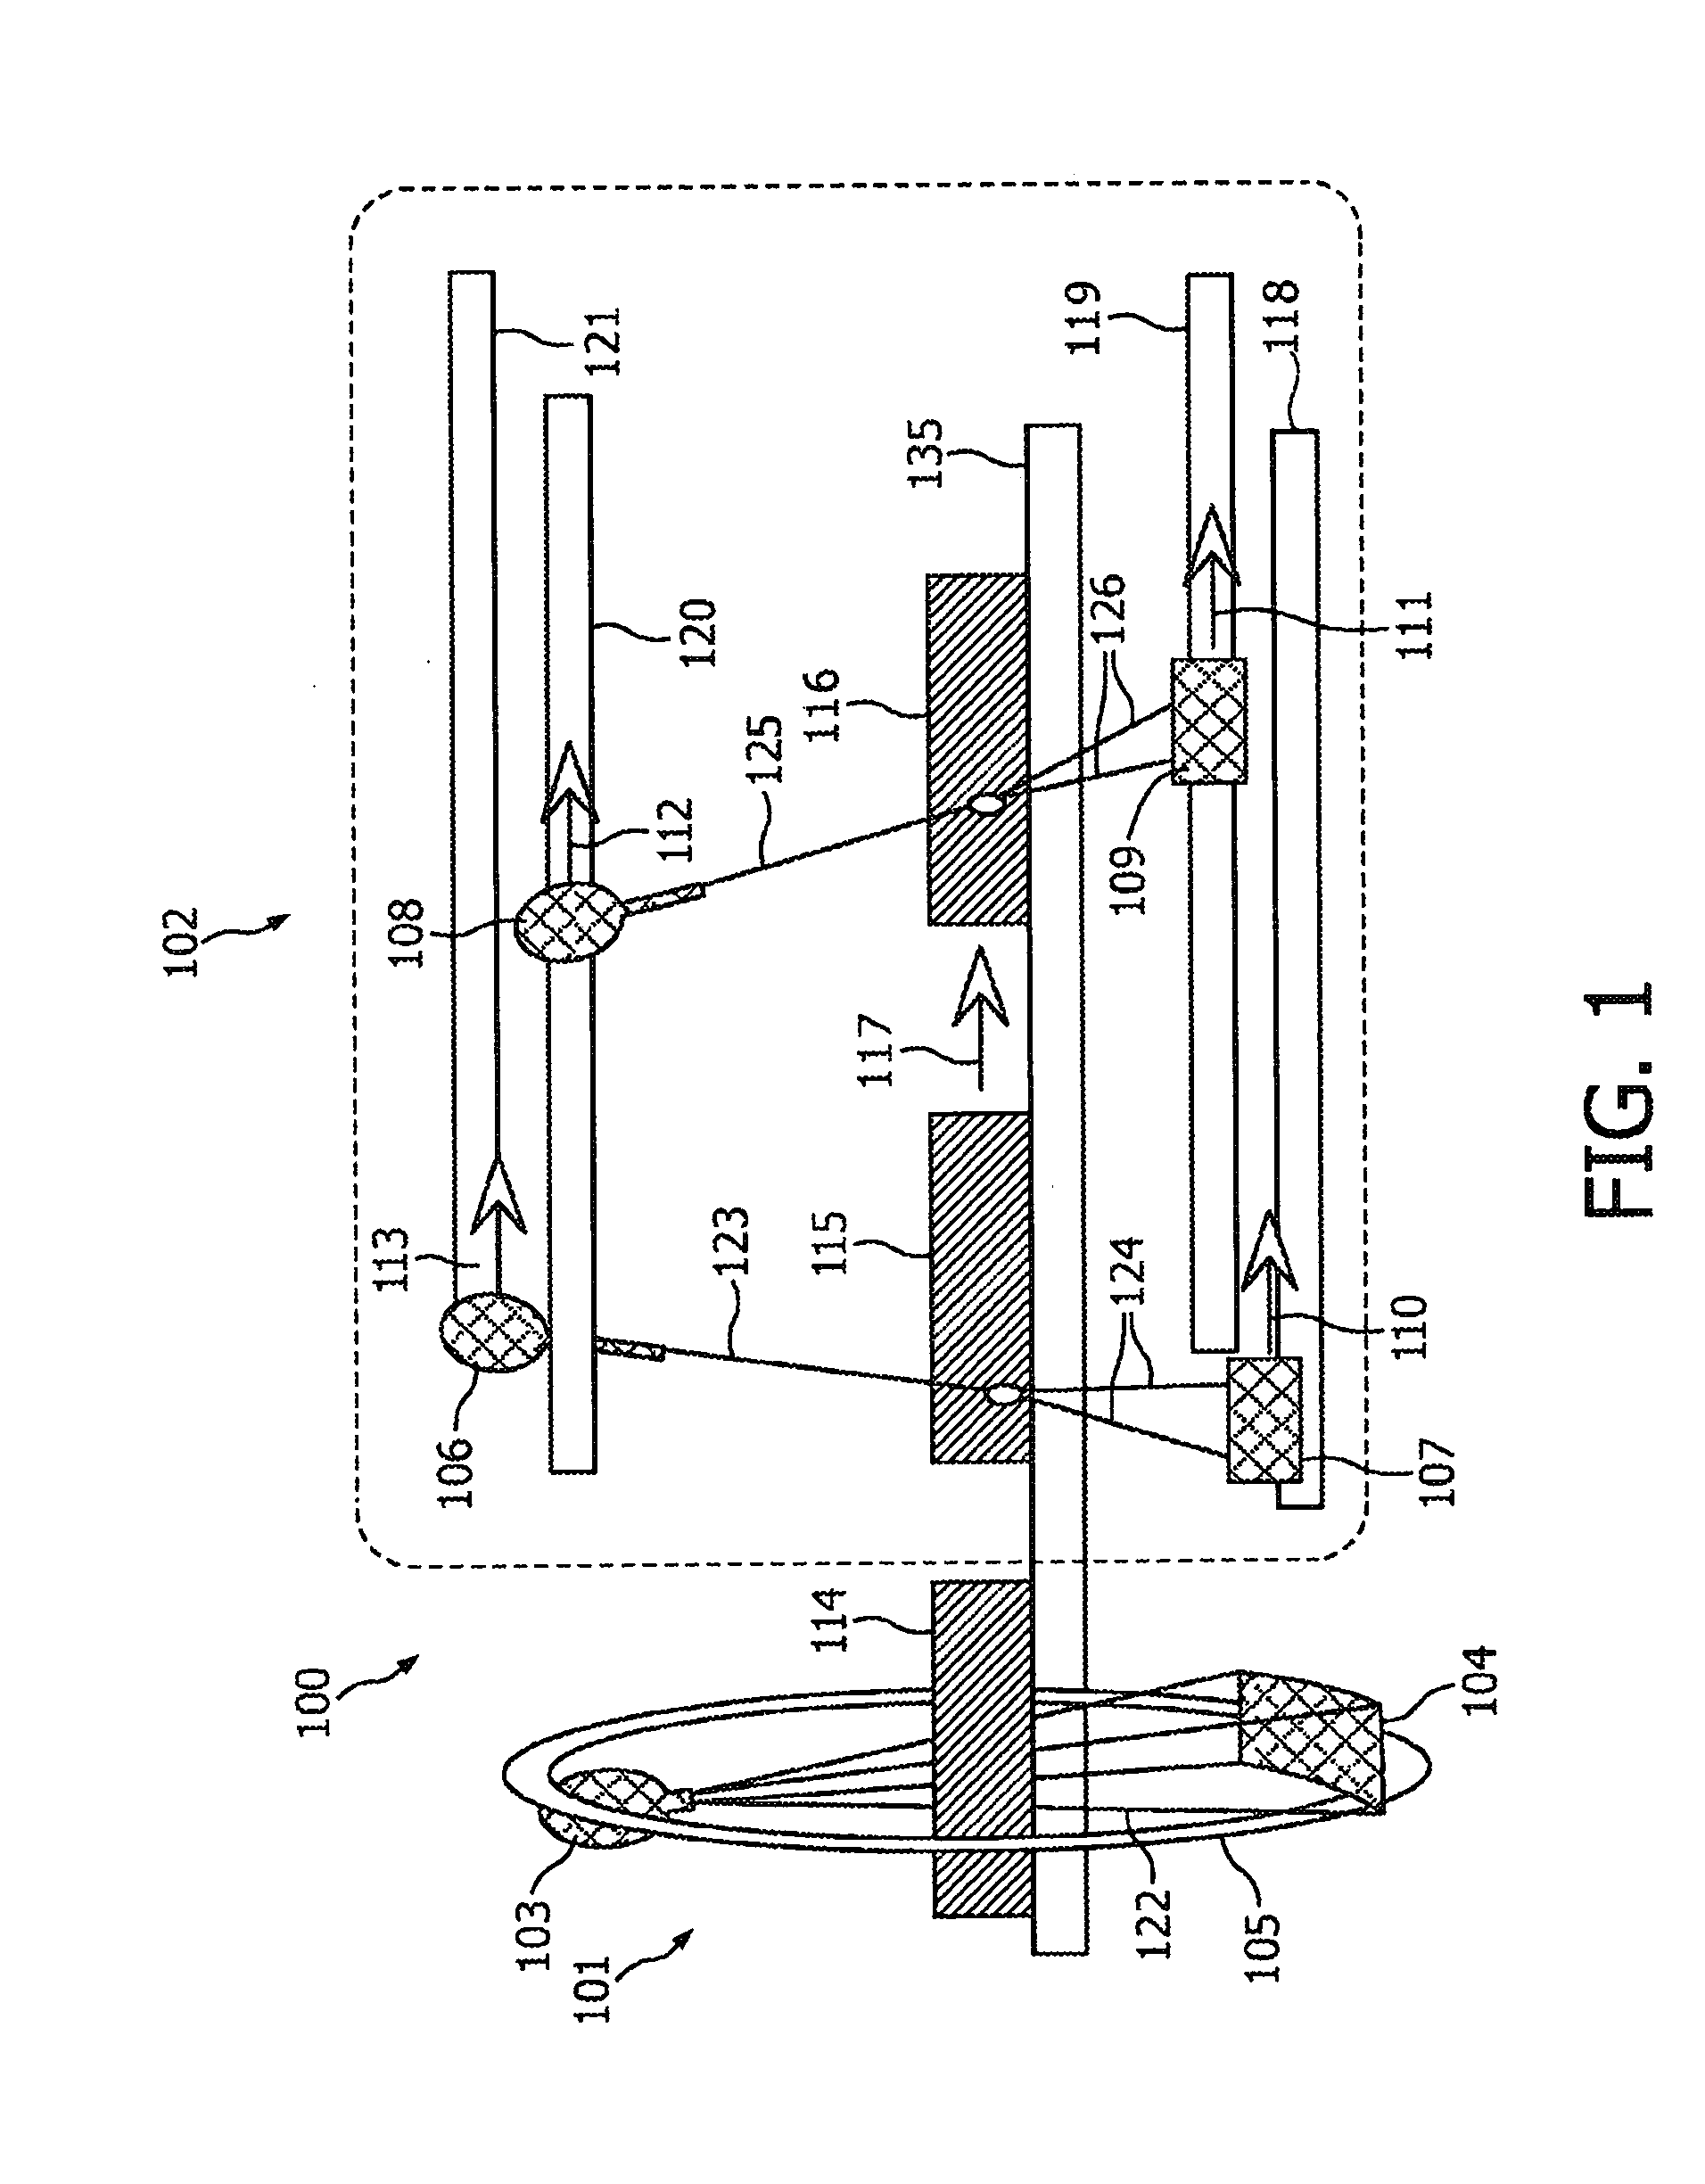 System and method for acquiring image data